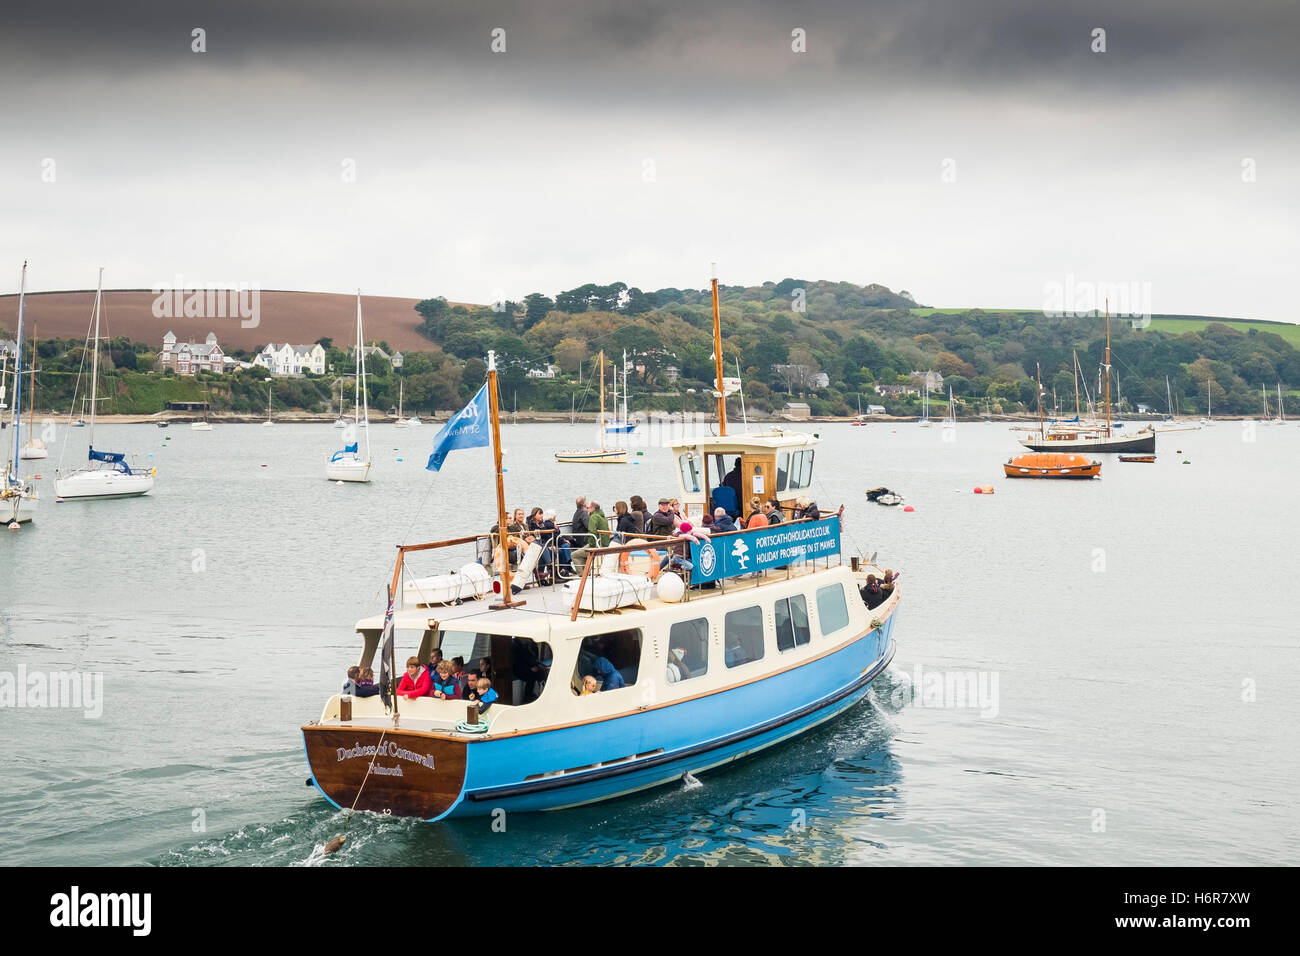 The St Mawes Ferry carries passengers across the Carrick Roads from Falmouth, Cornwall. Stock Photo